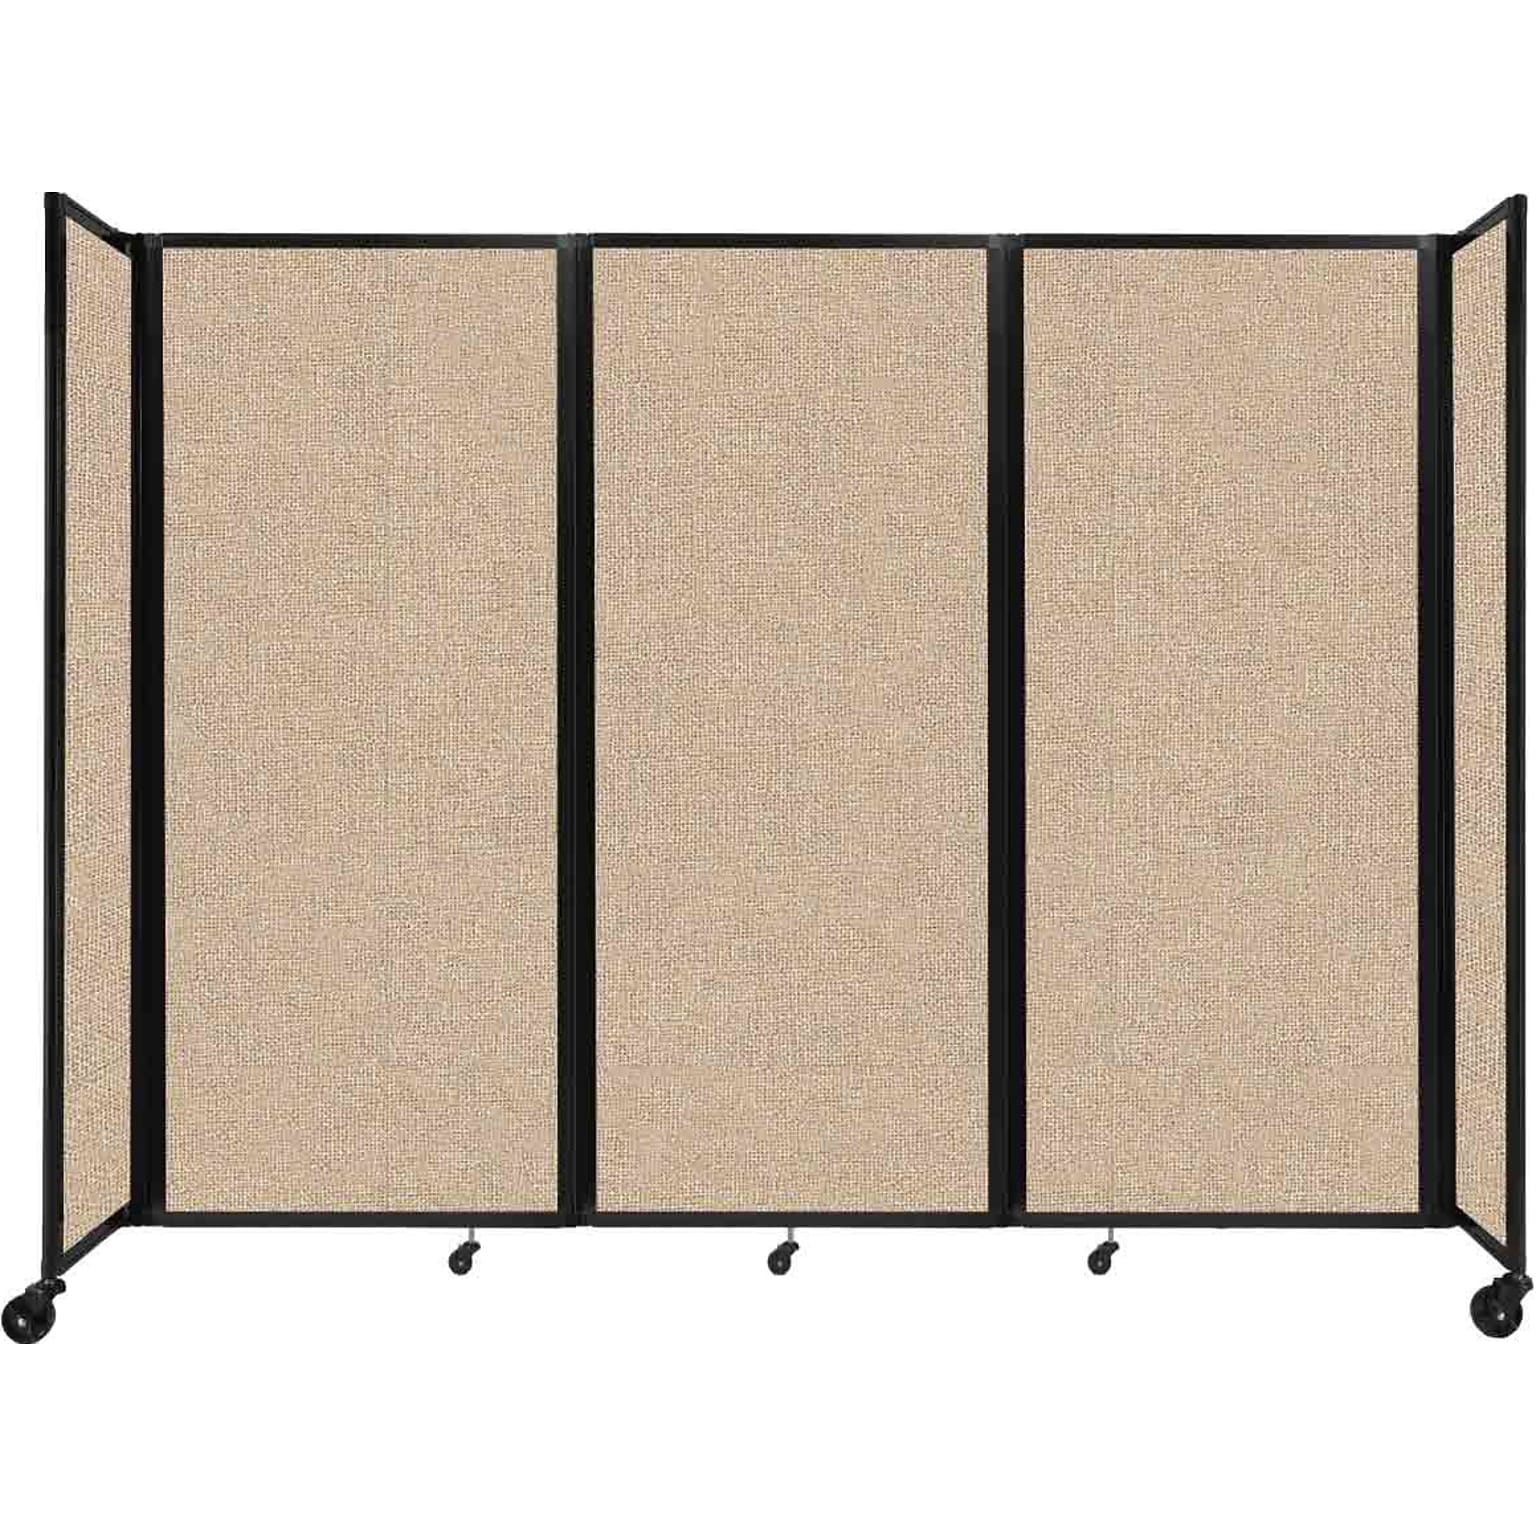 Versare The Room Divider 360 Freestanding Folding Portable Partition, 82H x 102W, Beige Fabric (1182301)